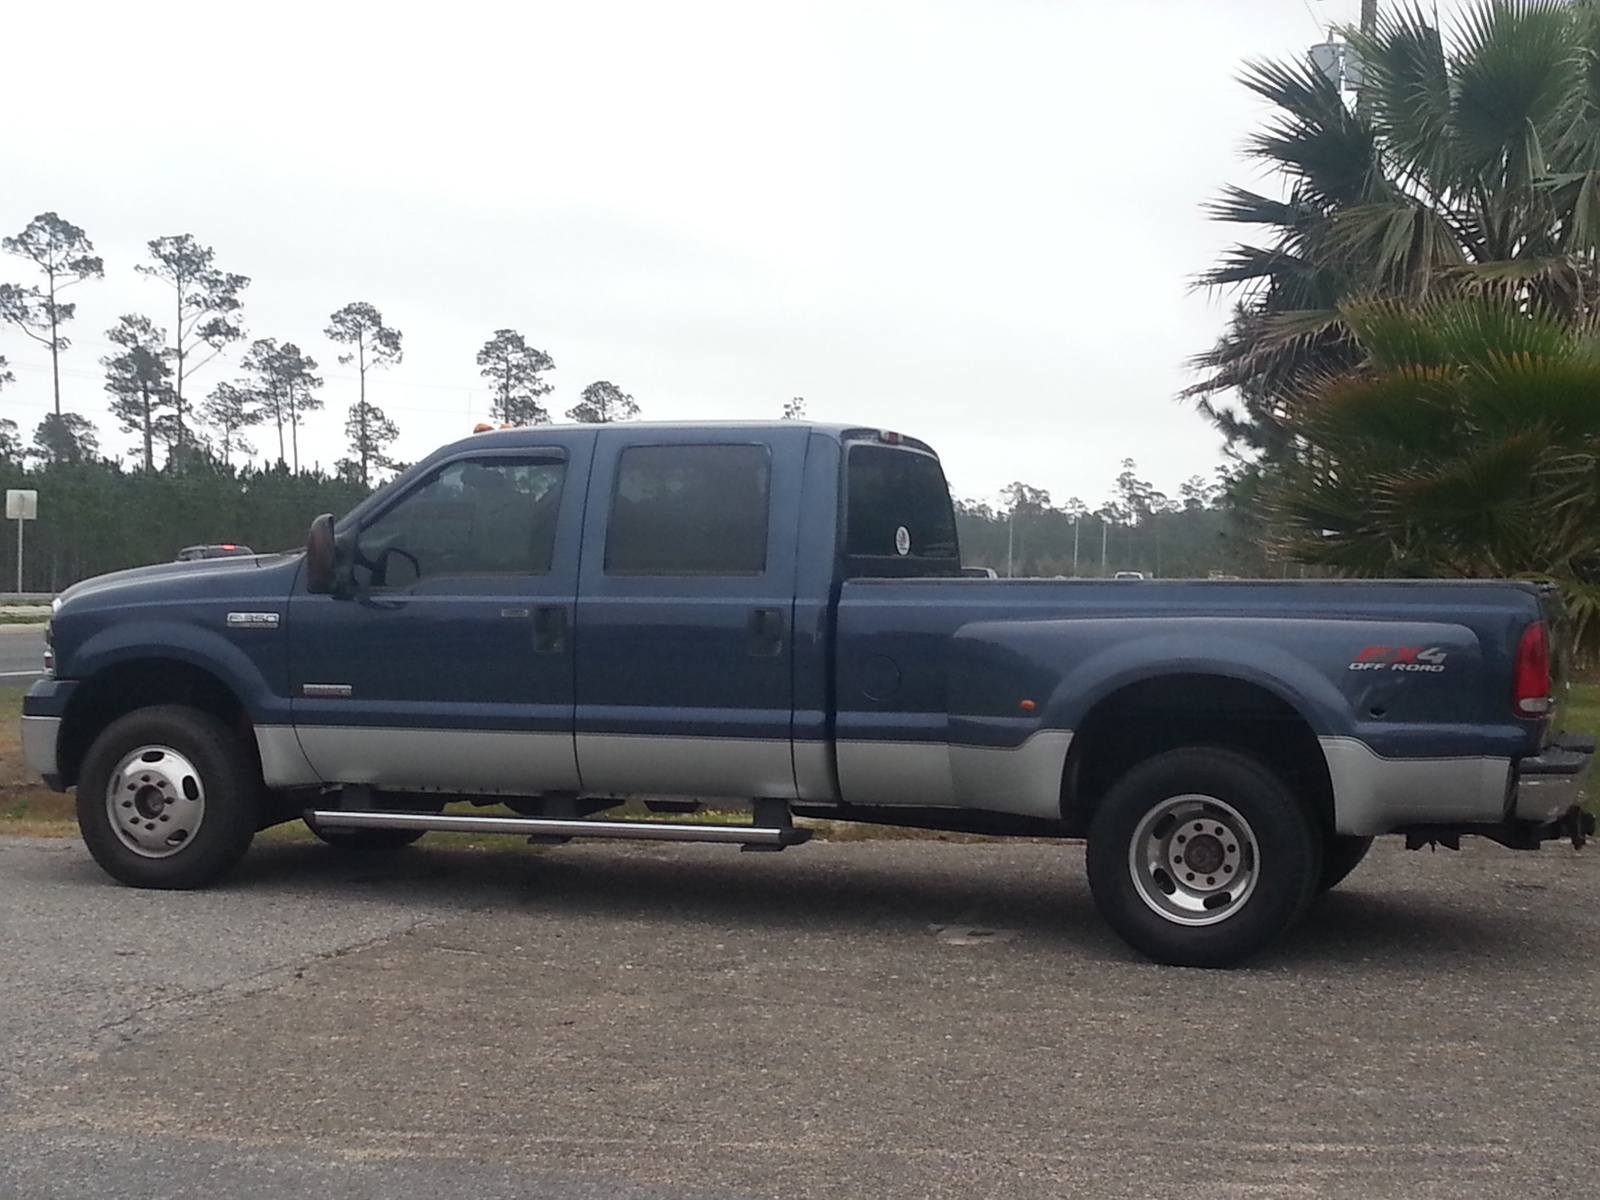 2005 Ford f350 super duty reviews #8